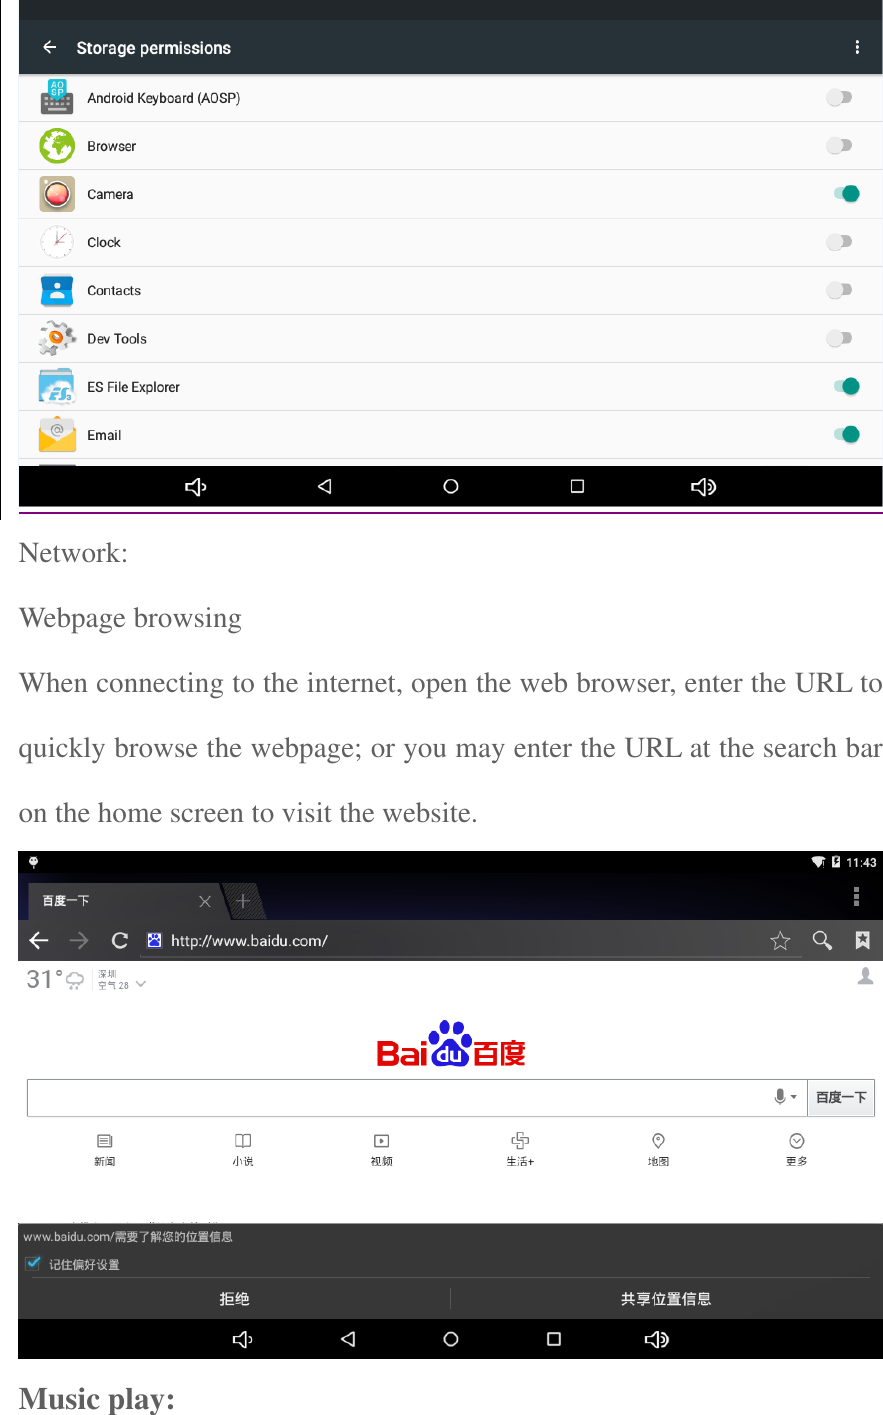   Network: Webpage browsing When connecting to the internet, open the web browser, enter the URL to quickly browse the webpage; or you may enter the URL at the search bar on the home screen to visit the website.    Music play: 